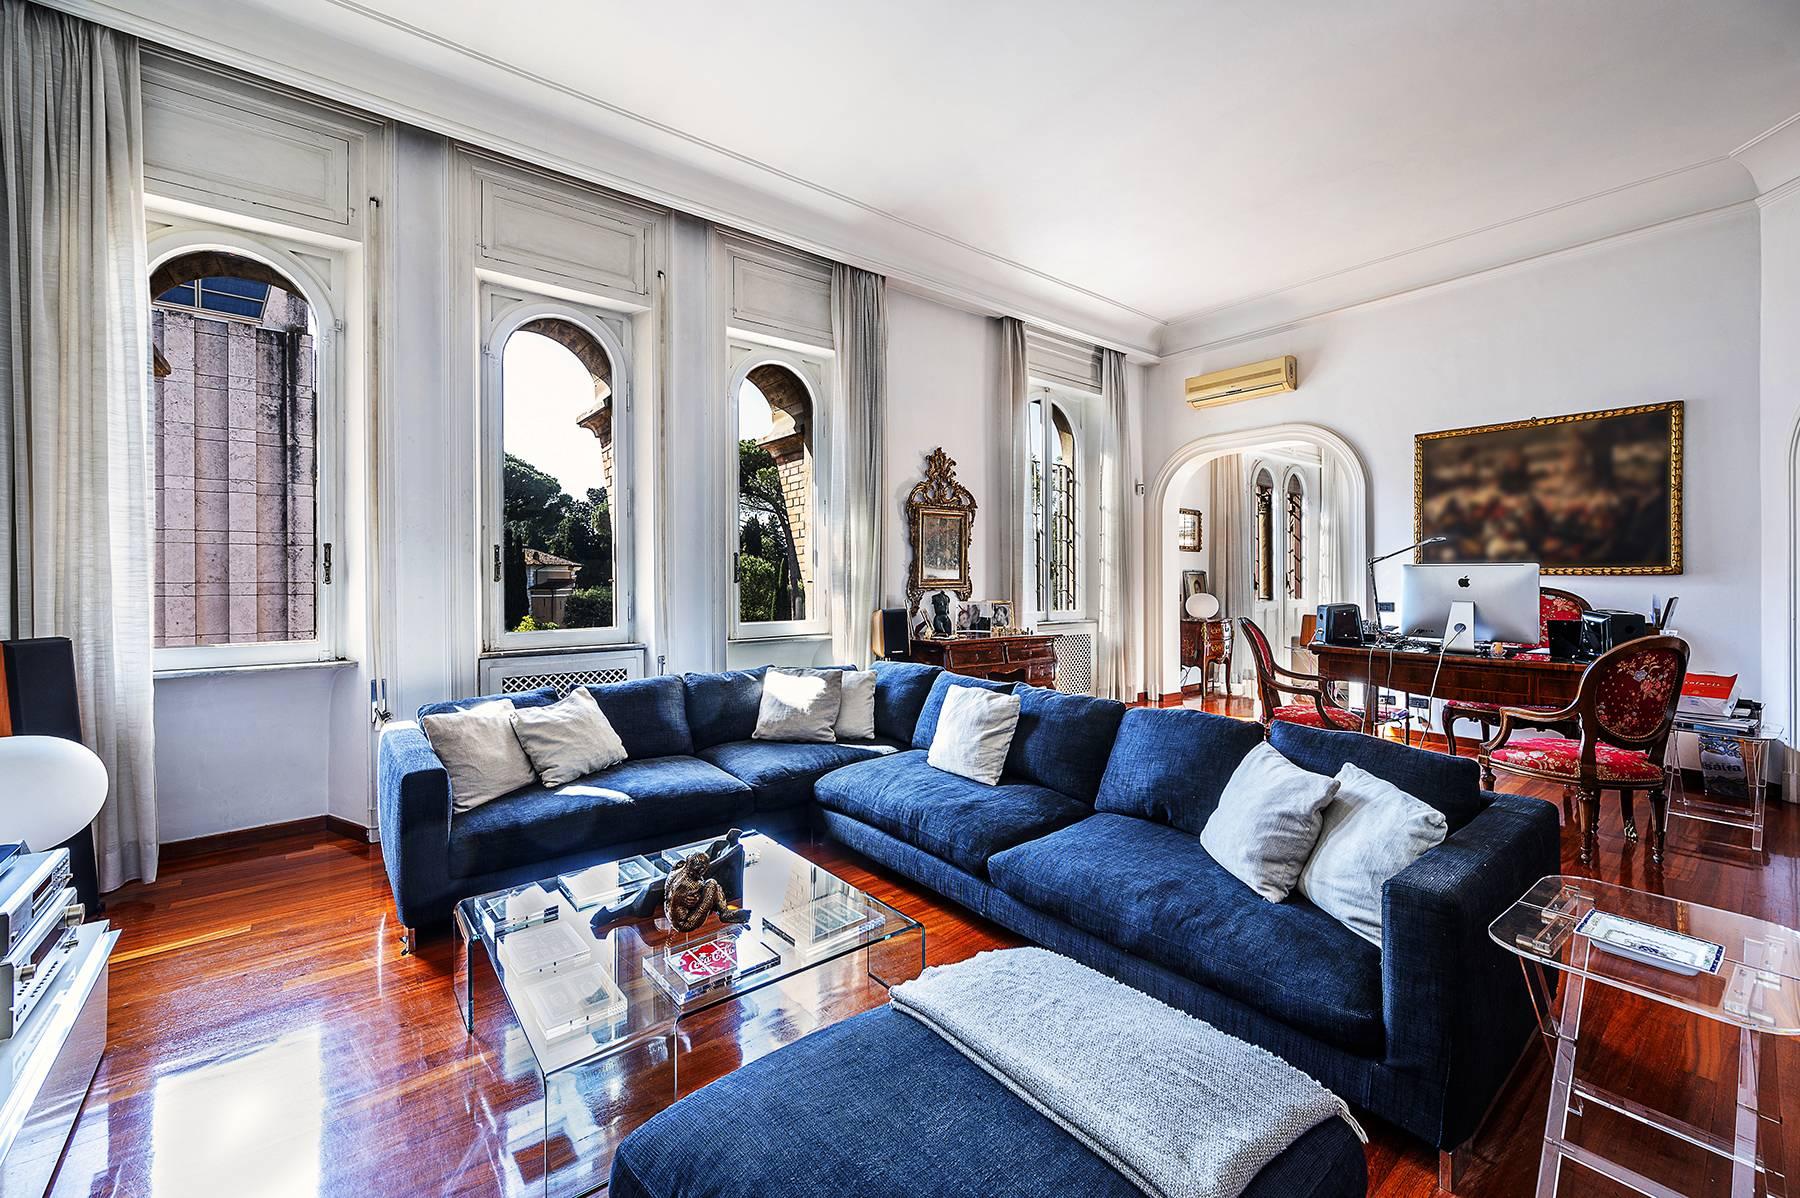 Superb penthouse located in an elegant Coppedè-style building - 3